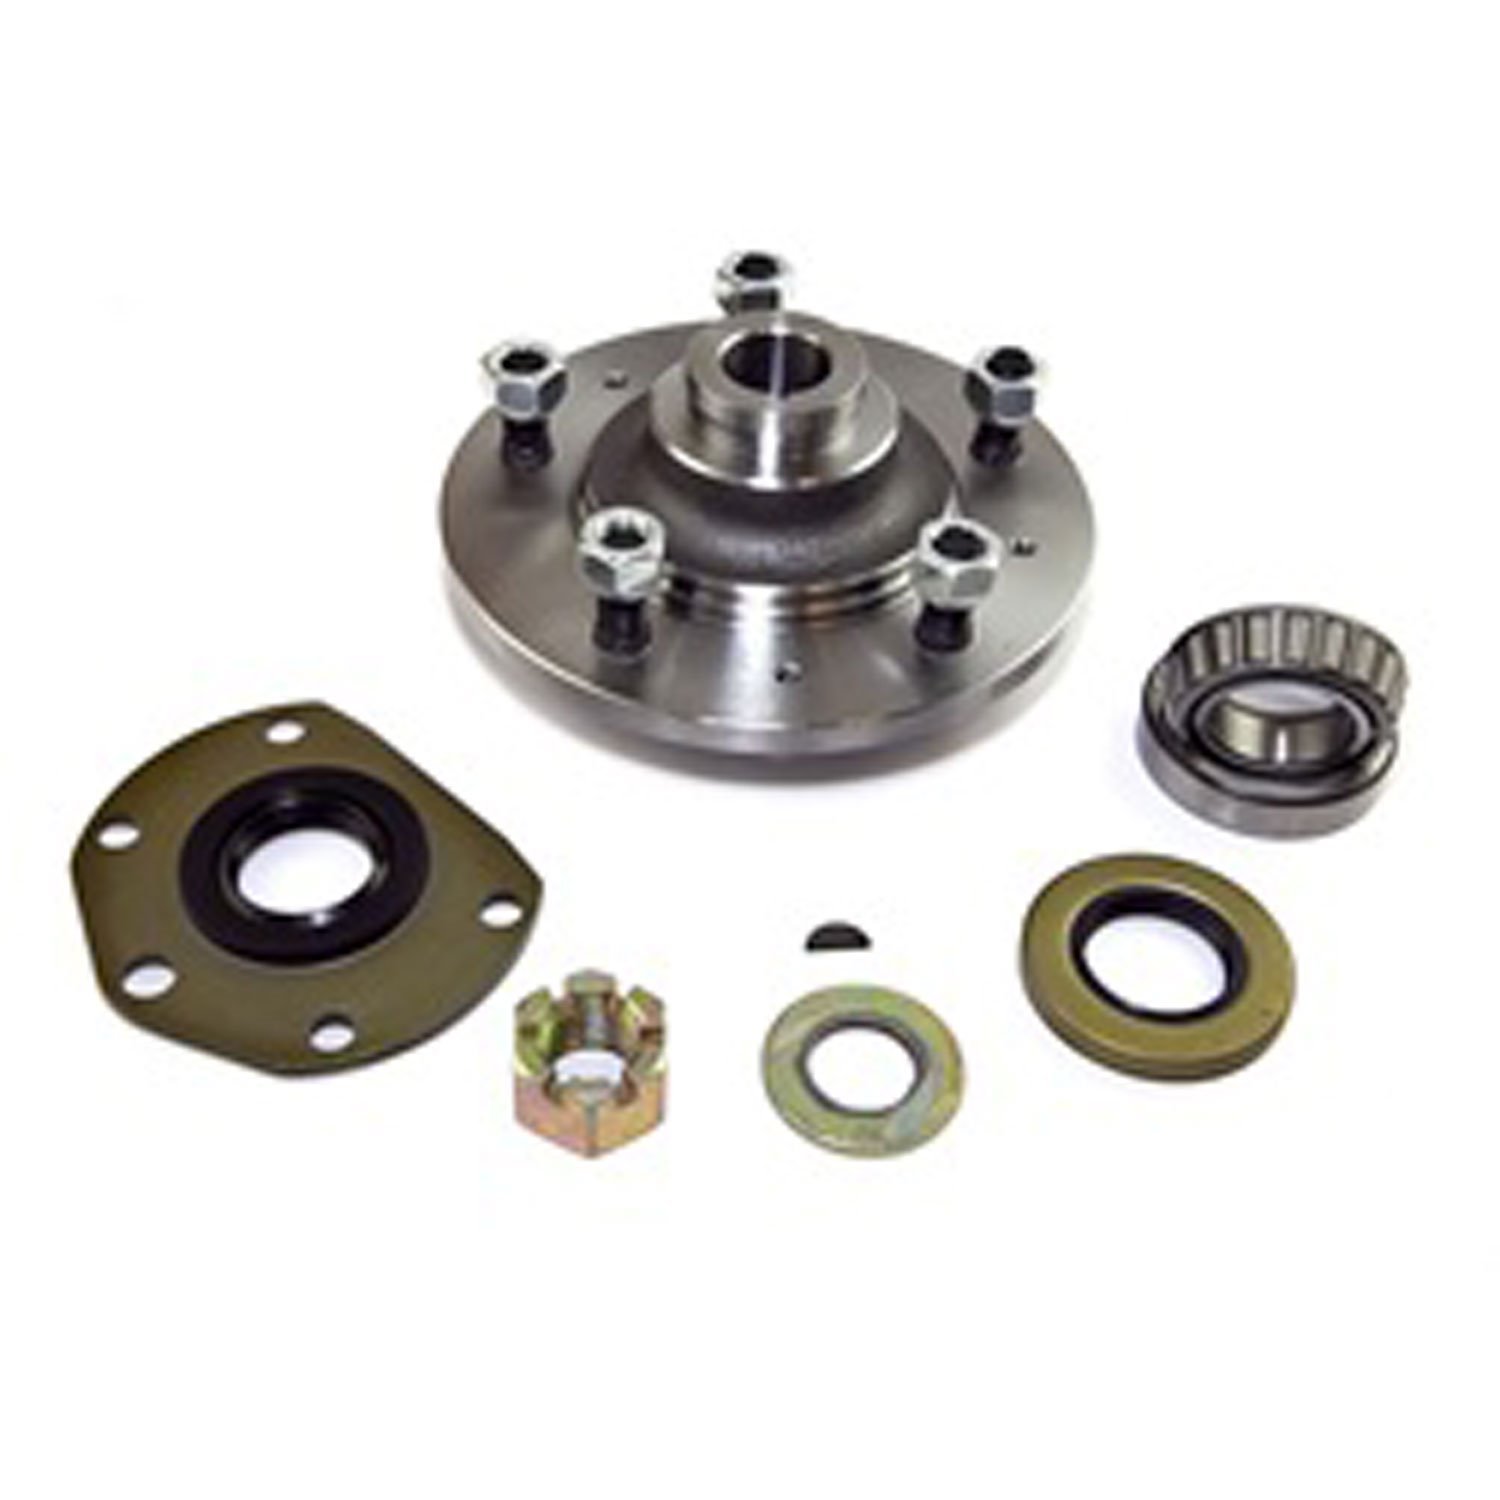 This rear axle hub kit from Omix-ADA fits 76-86 Jeep CJ models with an AMC 20 rear axle.